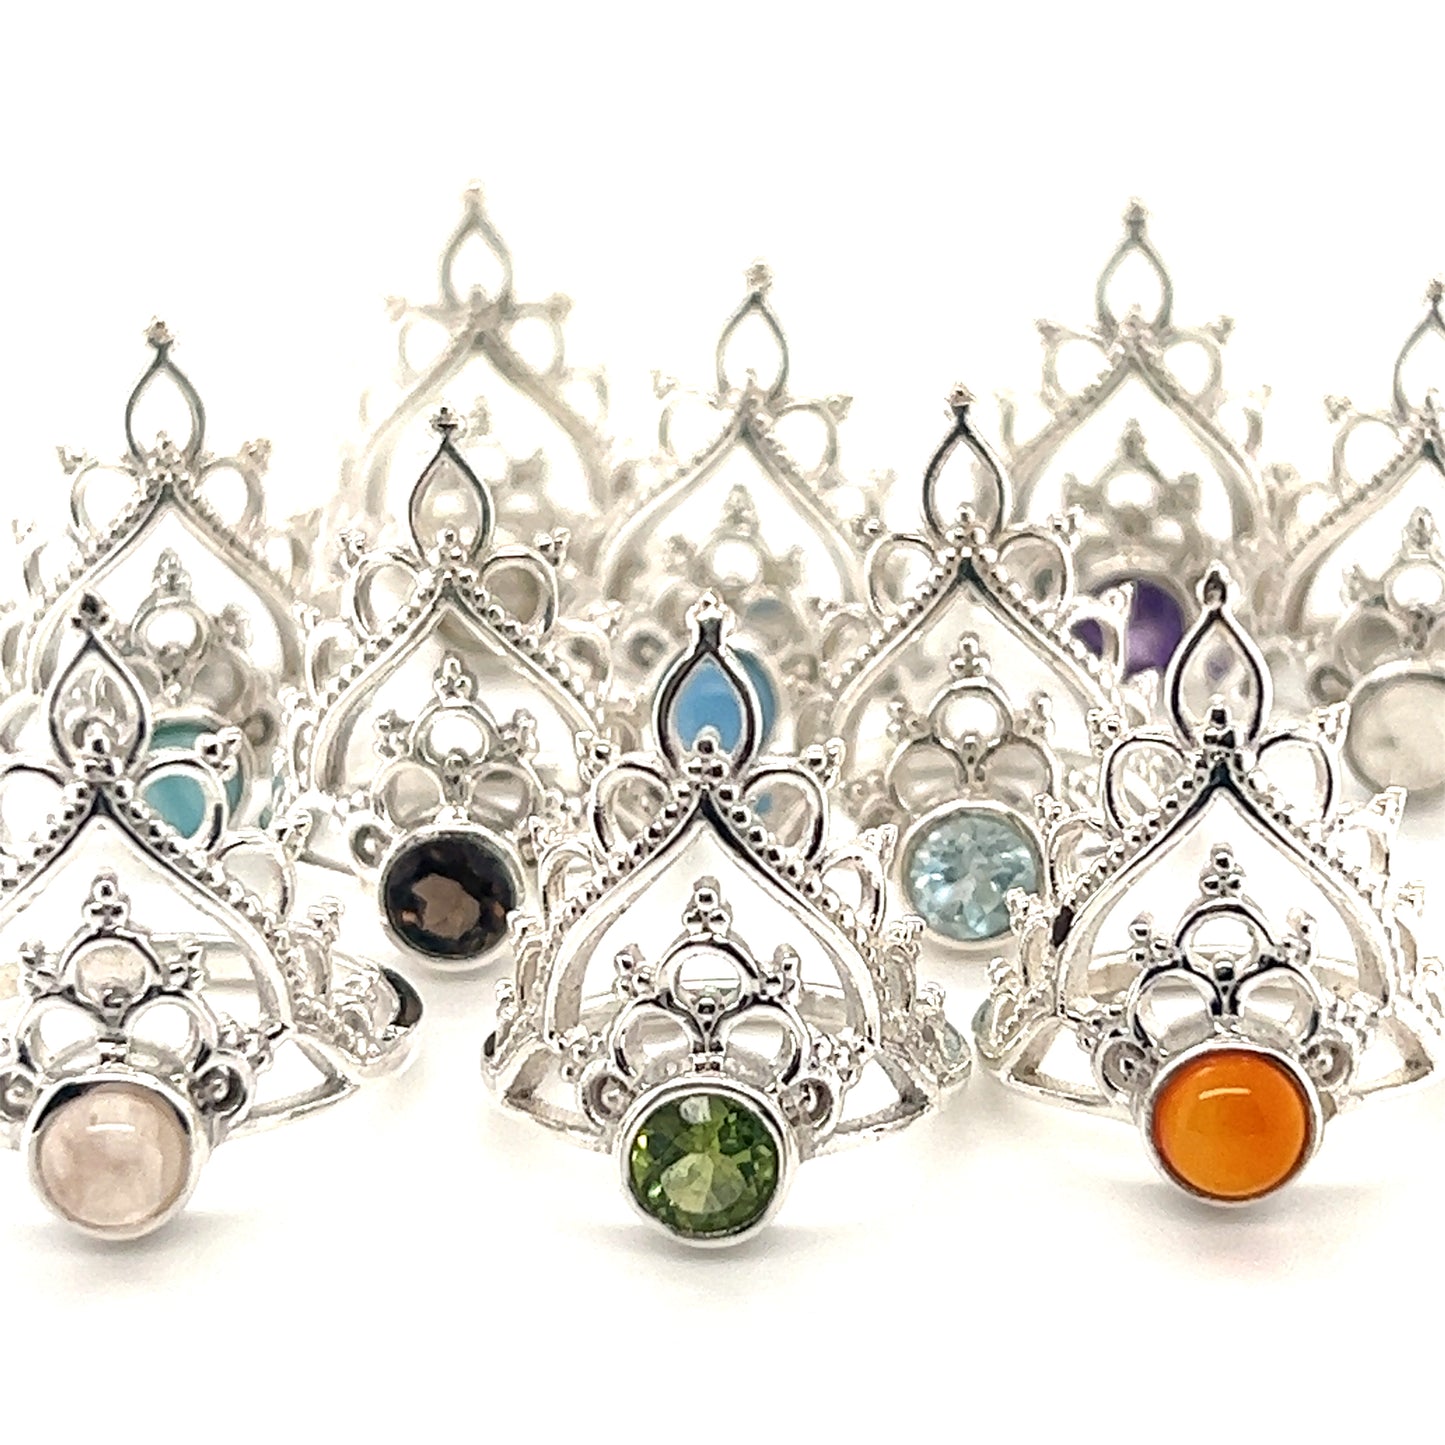 A collection of Henna Crown Rings with Natural Gemstones adorned with colorful stones.